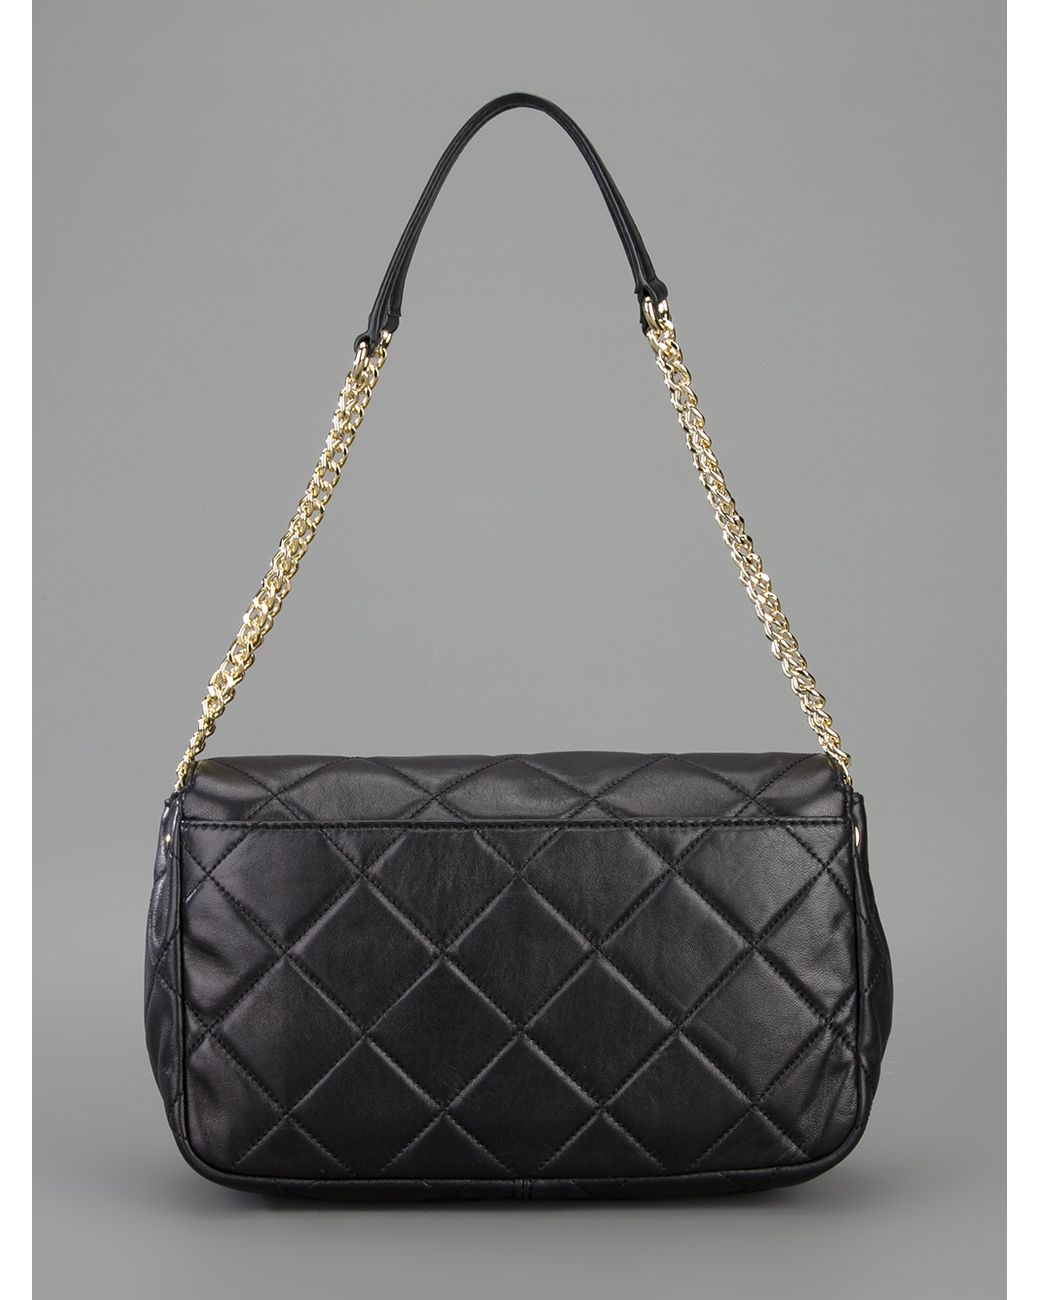 Chanel Wallet on Chain Clutch Cambon Black Leather Cross Body Bag –